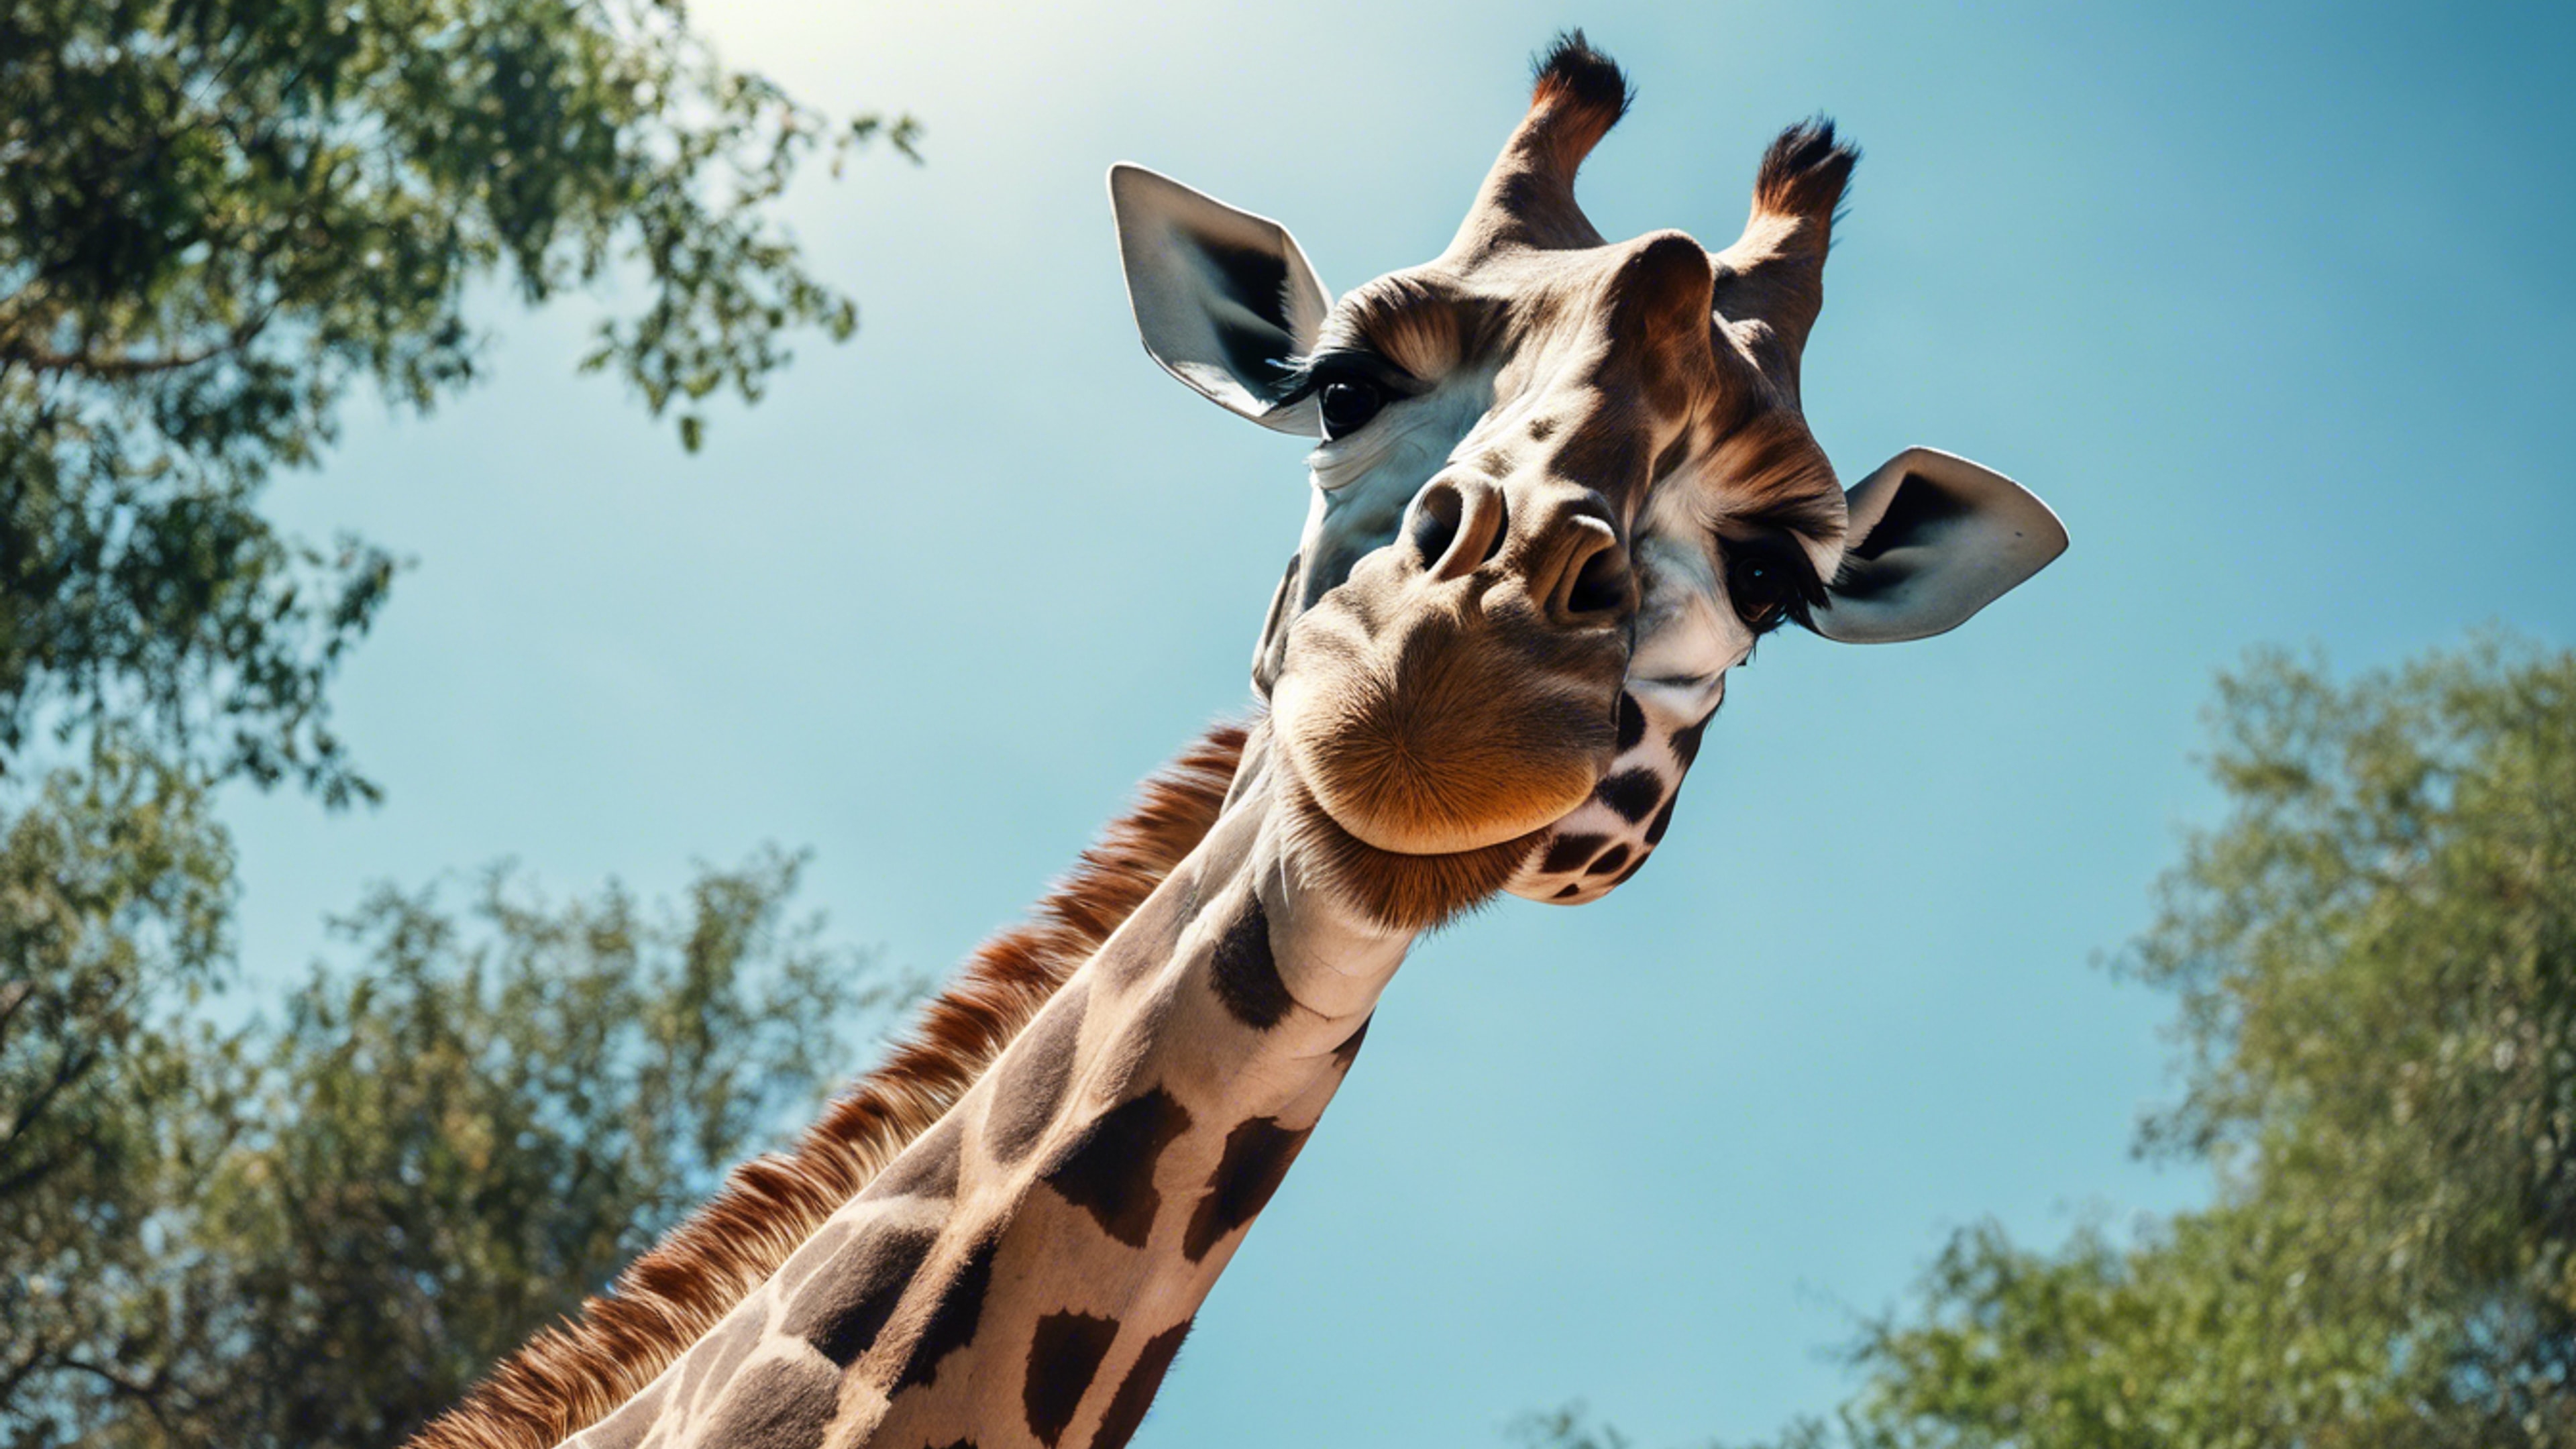 A picture from a below angle showing the towering magnificence of a giraffe against a clear blue sky. วอลล์เปเปอร์[8a88956d9aa2483bb204]